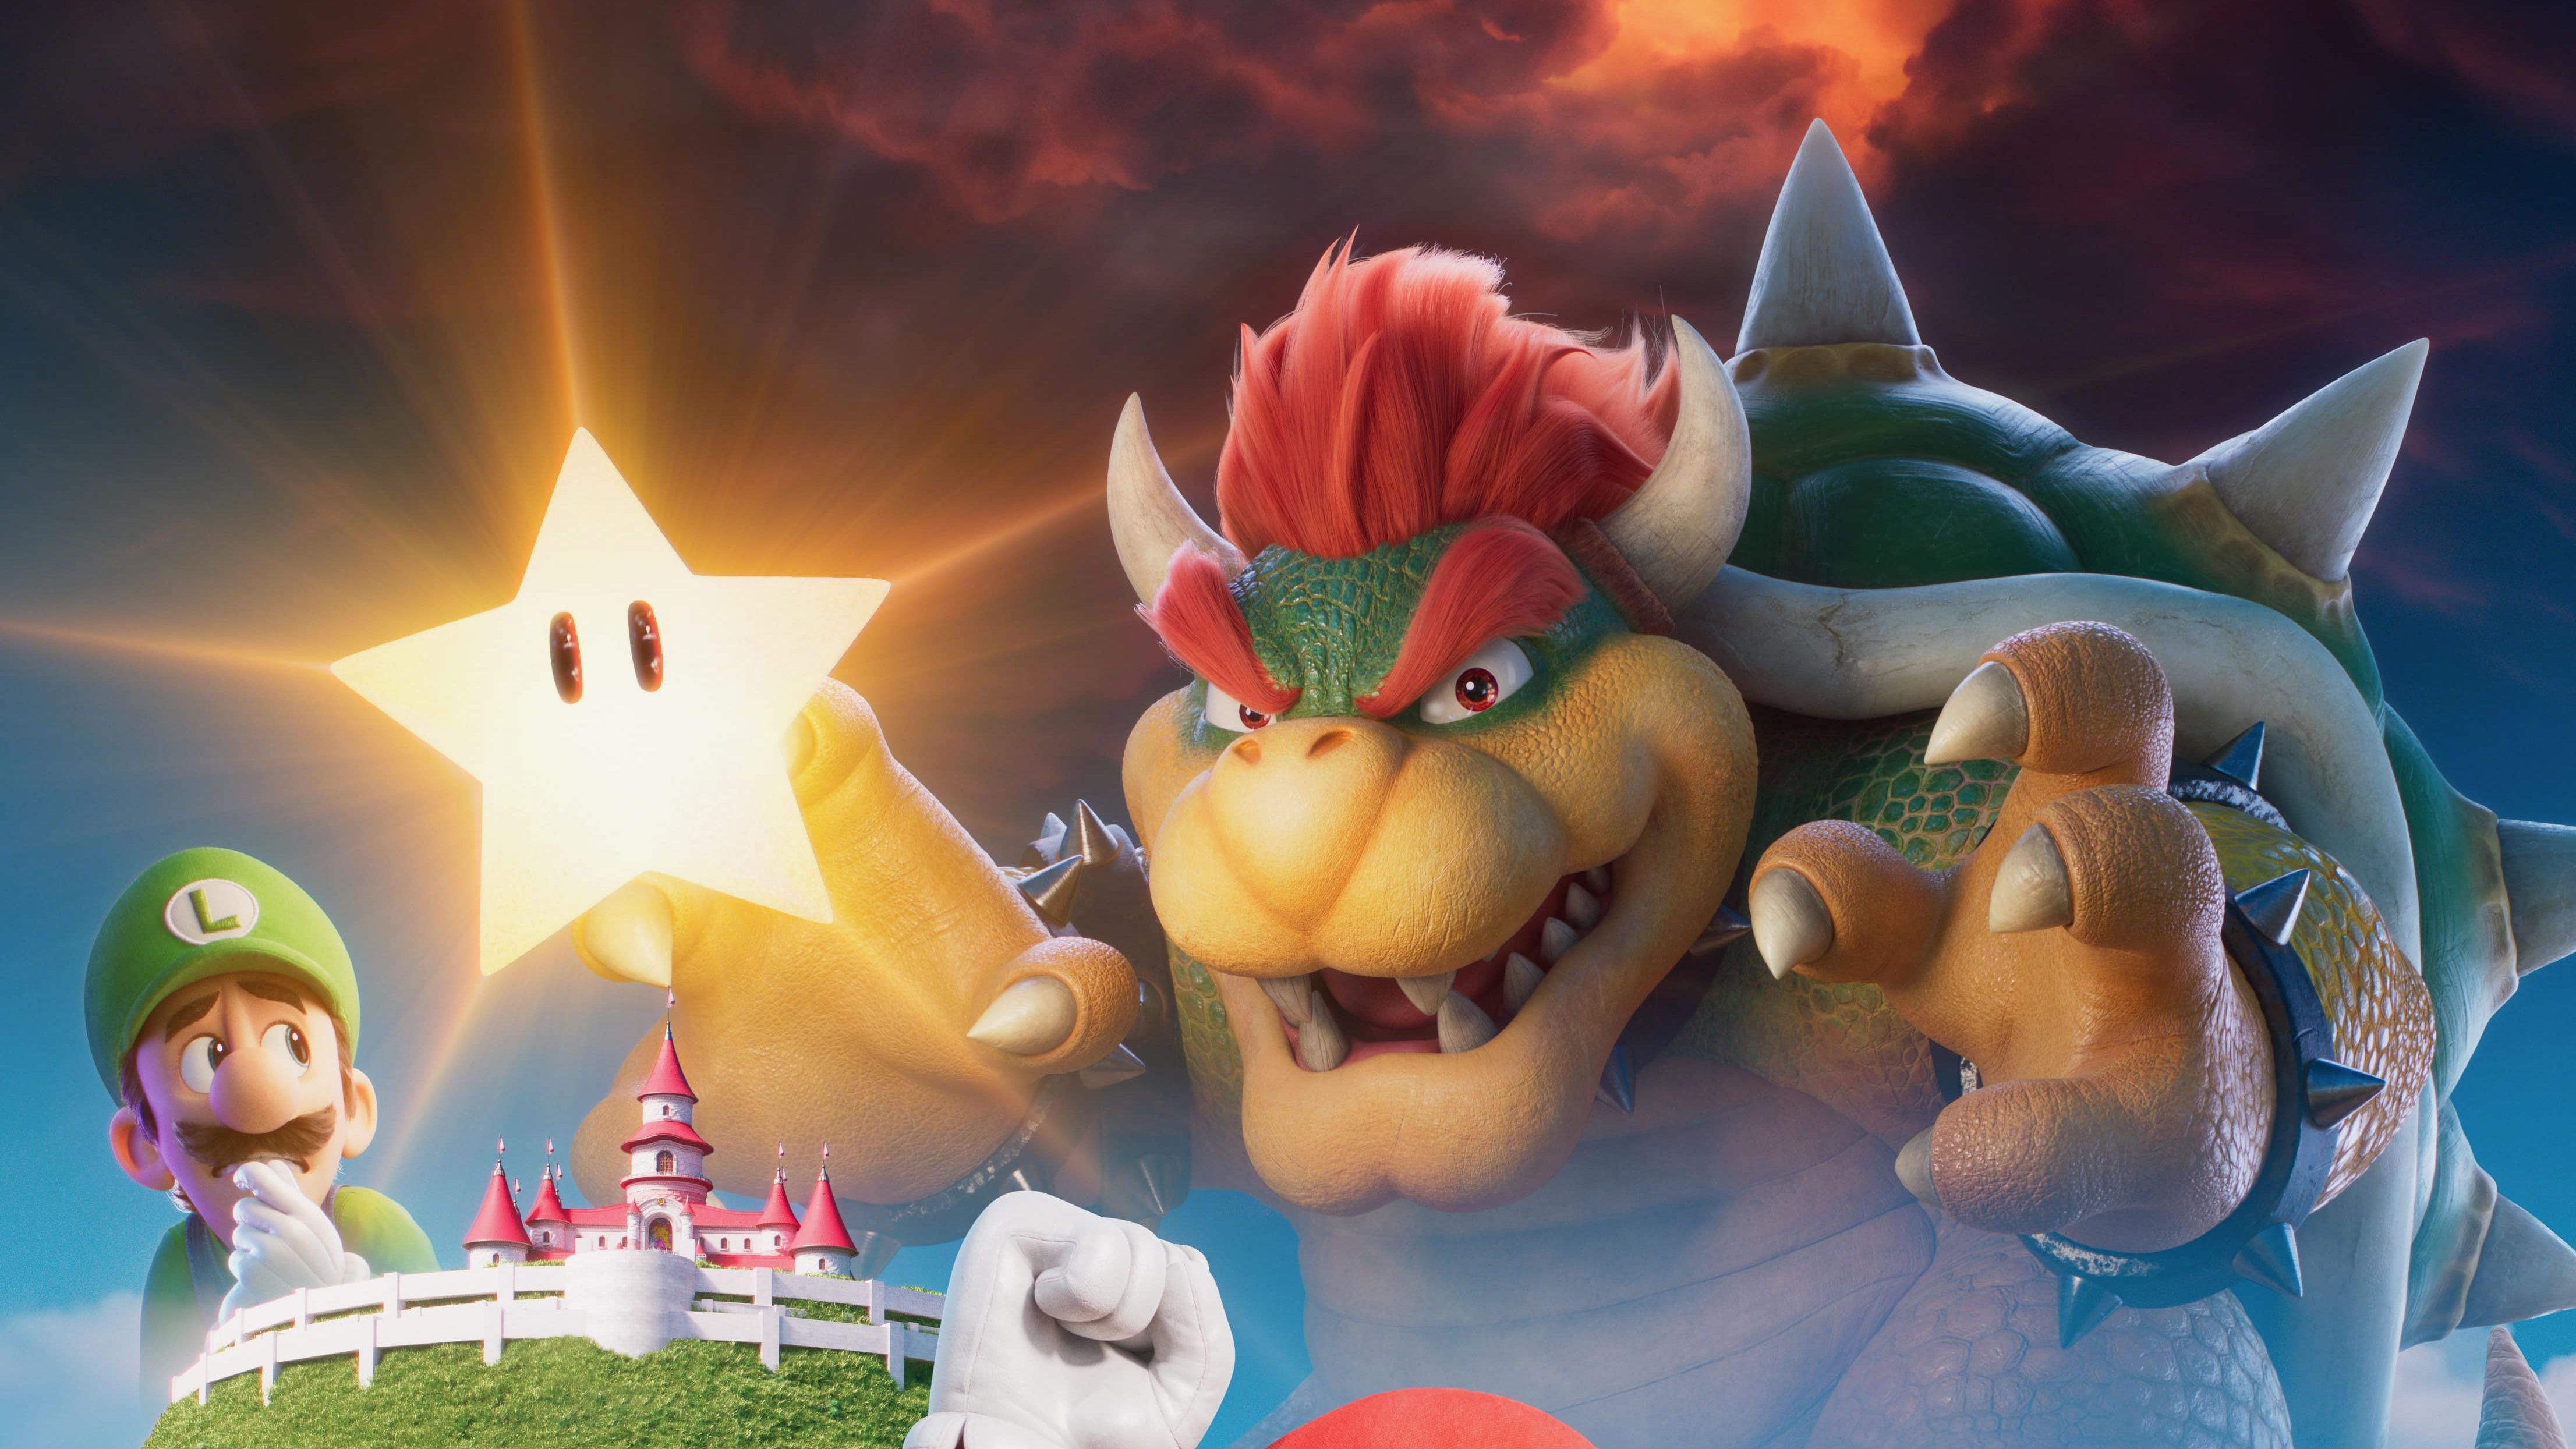 2560x1440 Mario 3D World Wallpaper for your PC, mobile or tablet. - Bowser